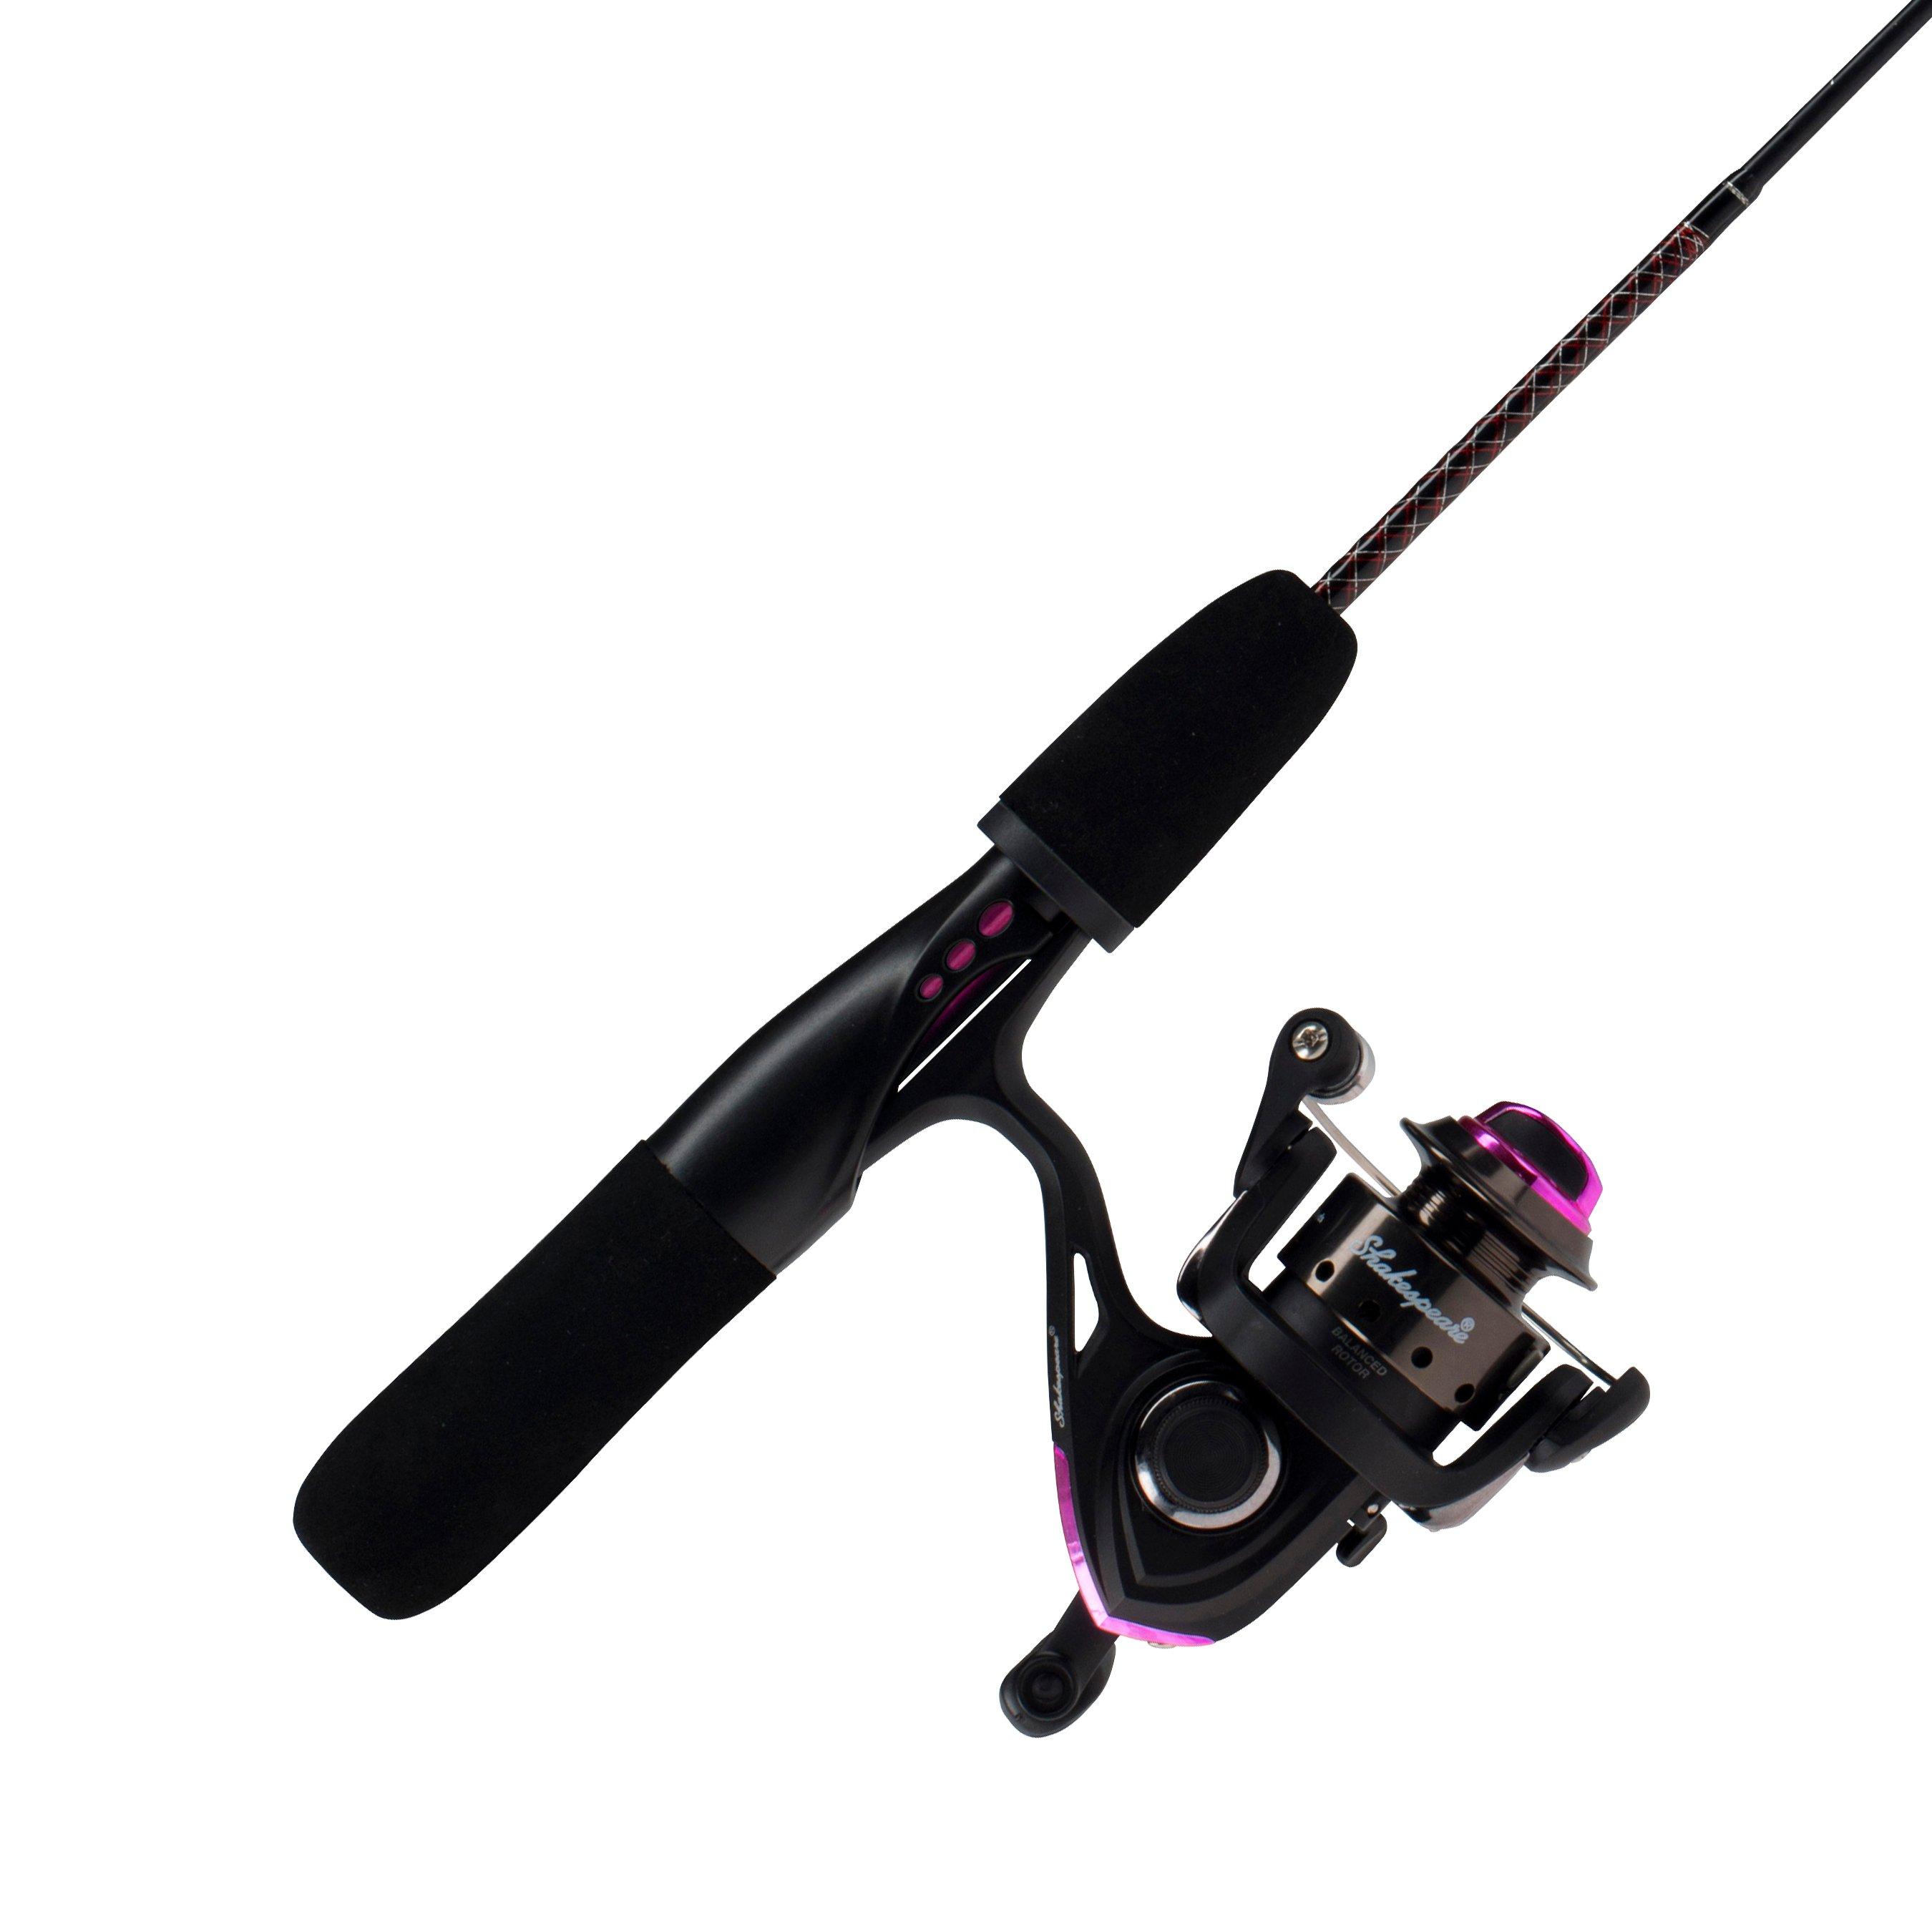 https://cs1.0ps.us/original/opplanet-ugly-stik-gx2-ladies-ice-combo-5-2-1-right-left-20-26in-rod-length-light-power-1-piece-rod-lusgxice26lcbo-main